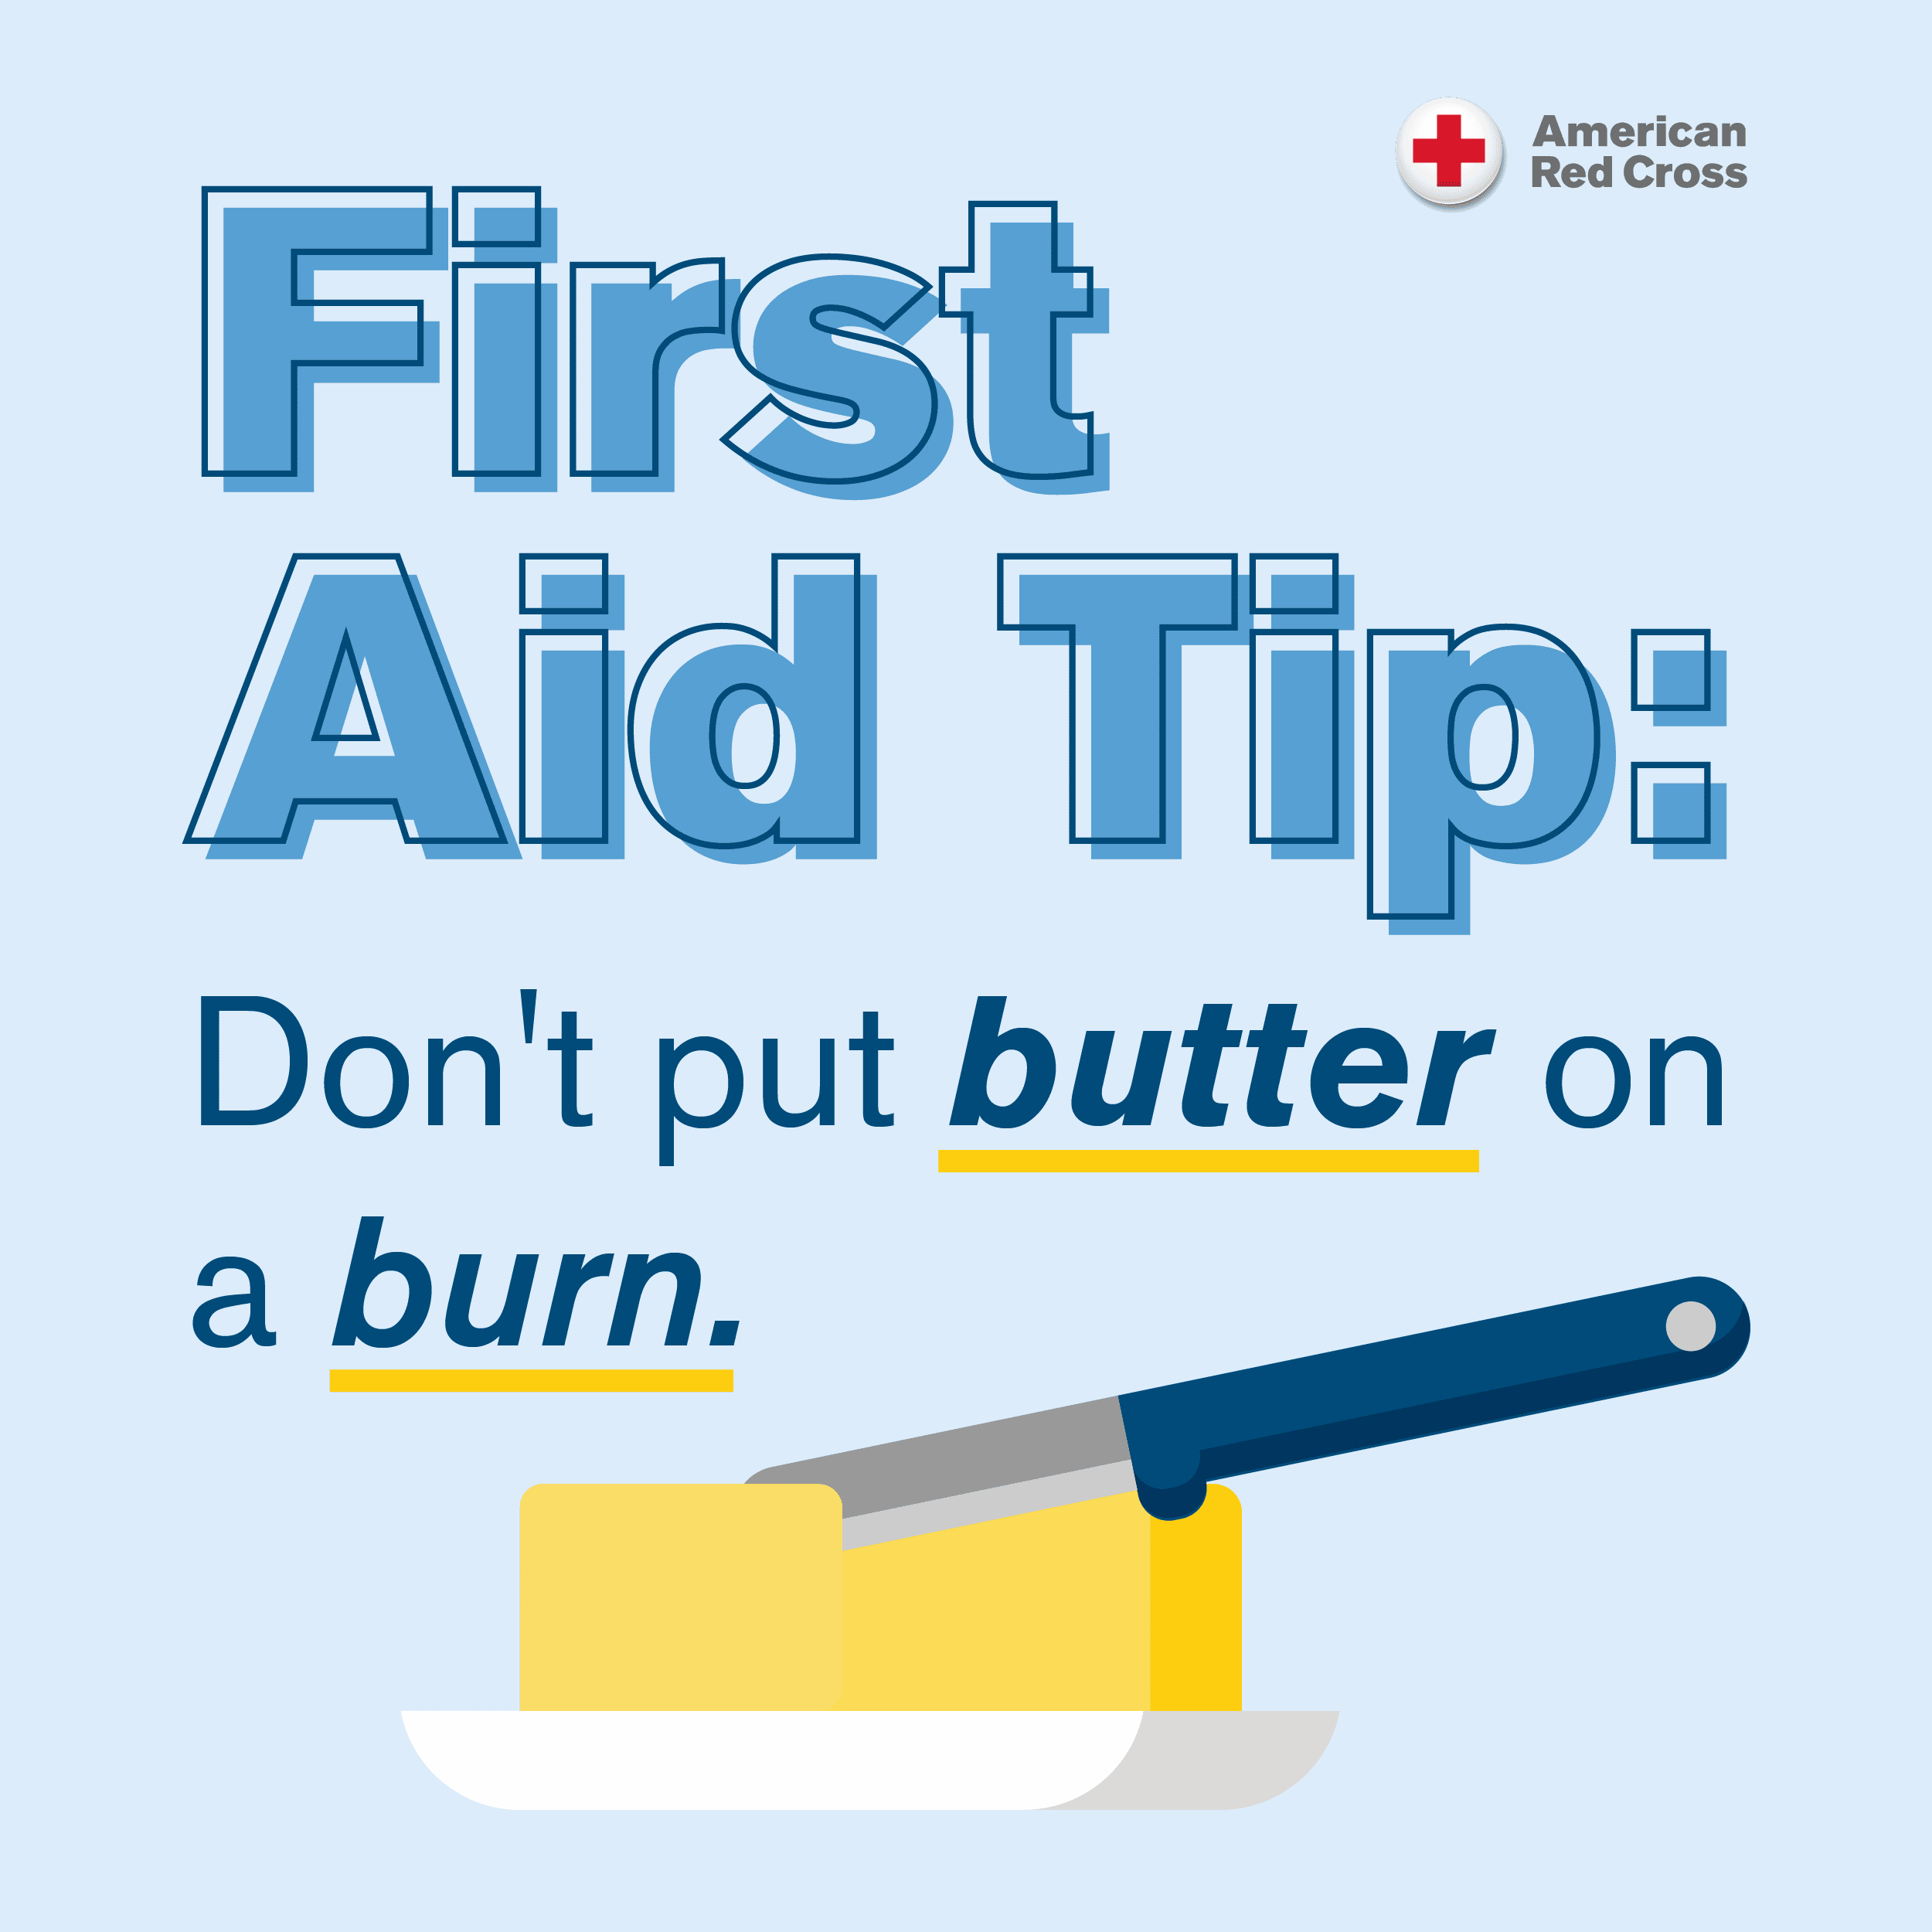 Eight First-Aid Safety Tips & Best Practices